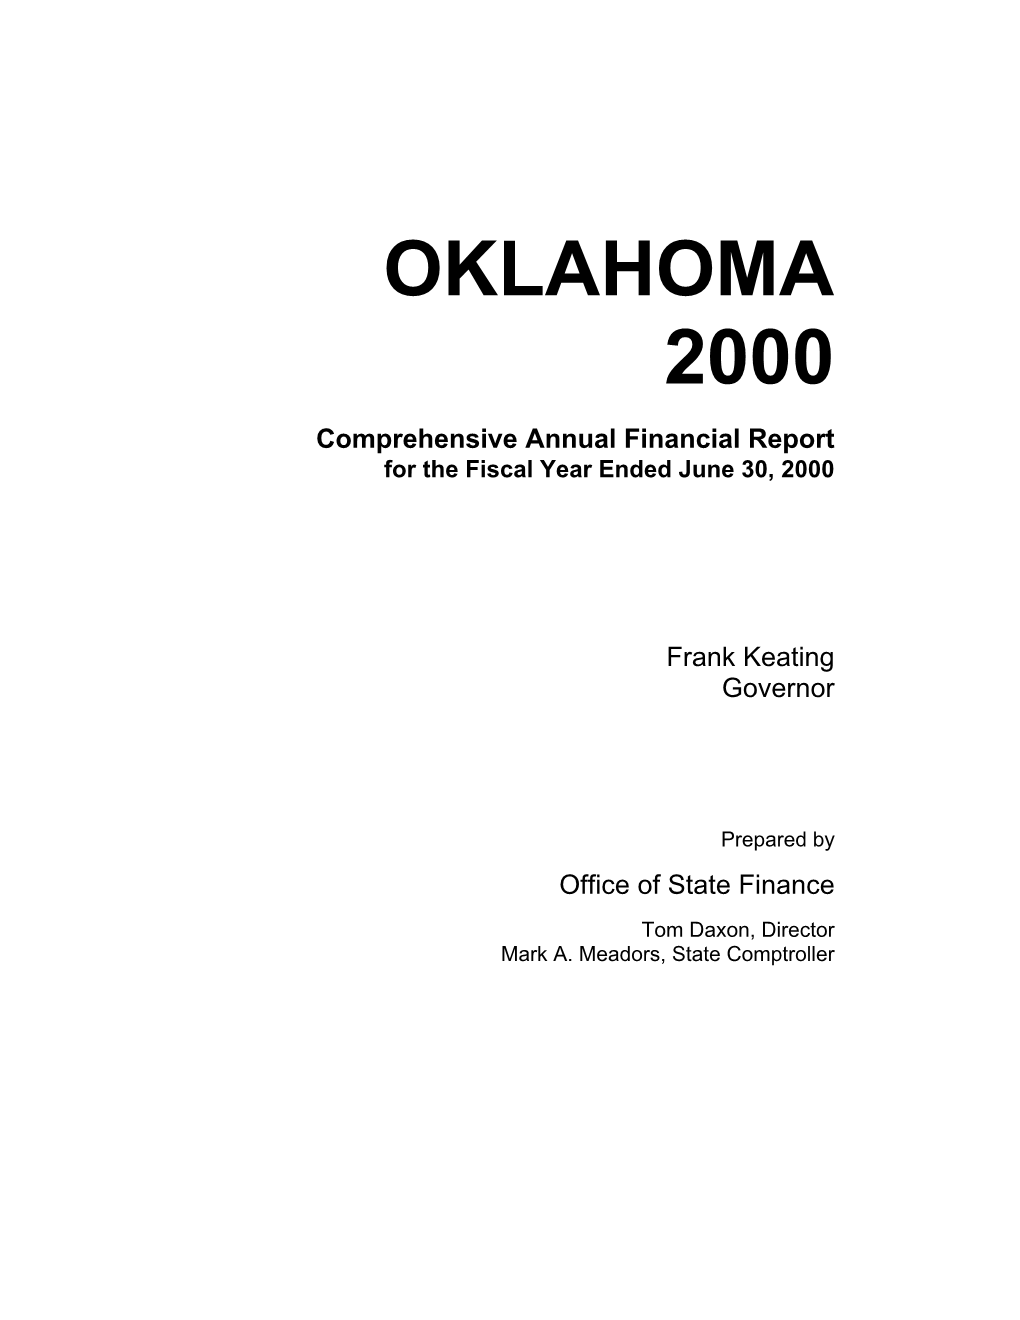 State of Oklahoma Comprehensive Annual Financial